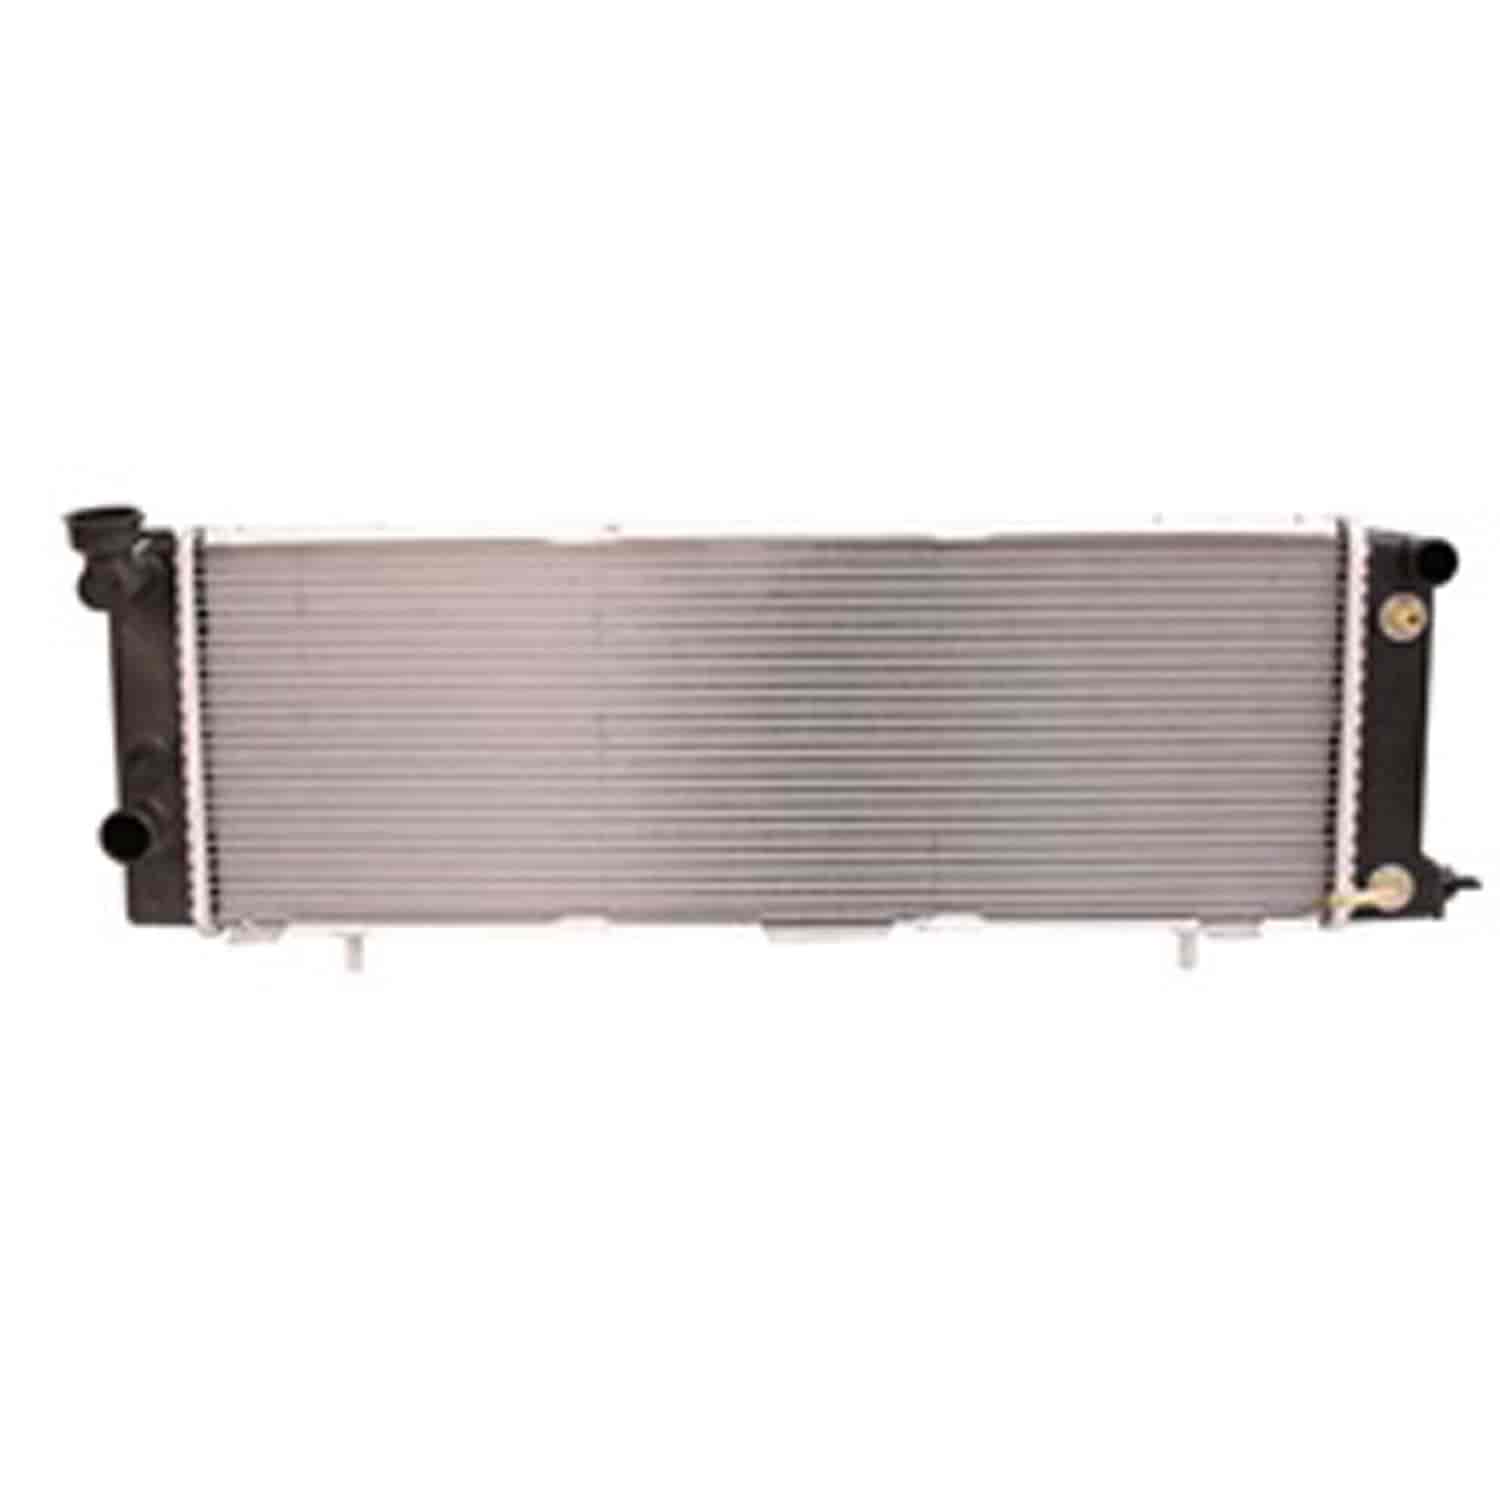 This 1 row radiator from Omix-ADA fits 93-94 Cherokee RHD 4.0L with or without AC automatic transmission.